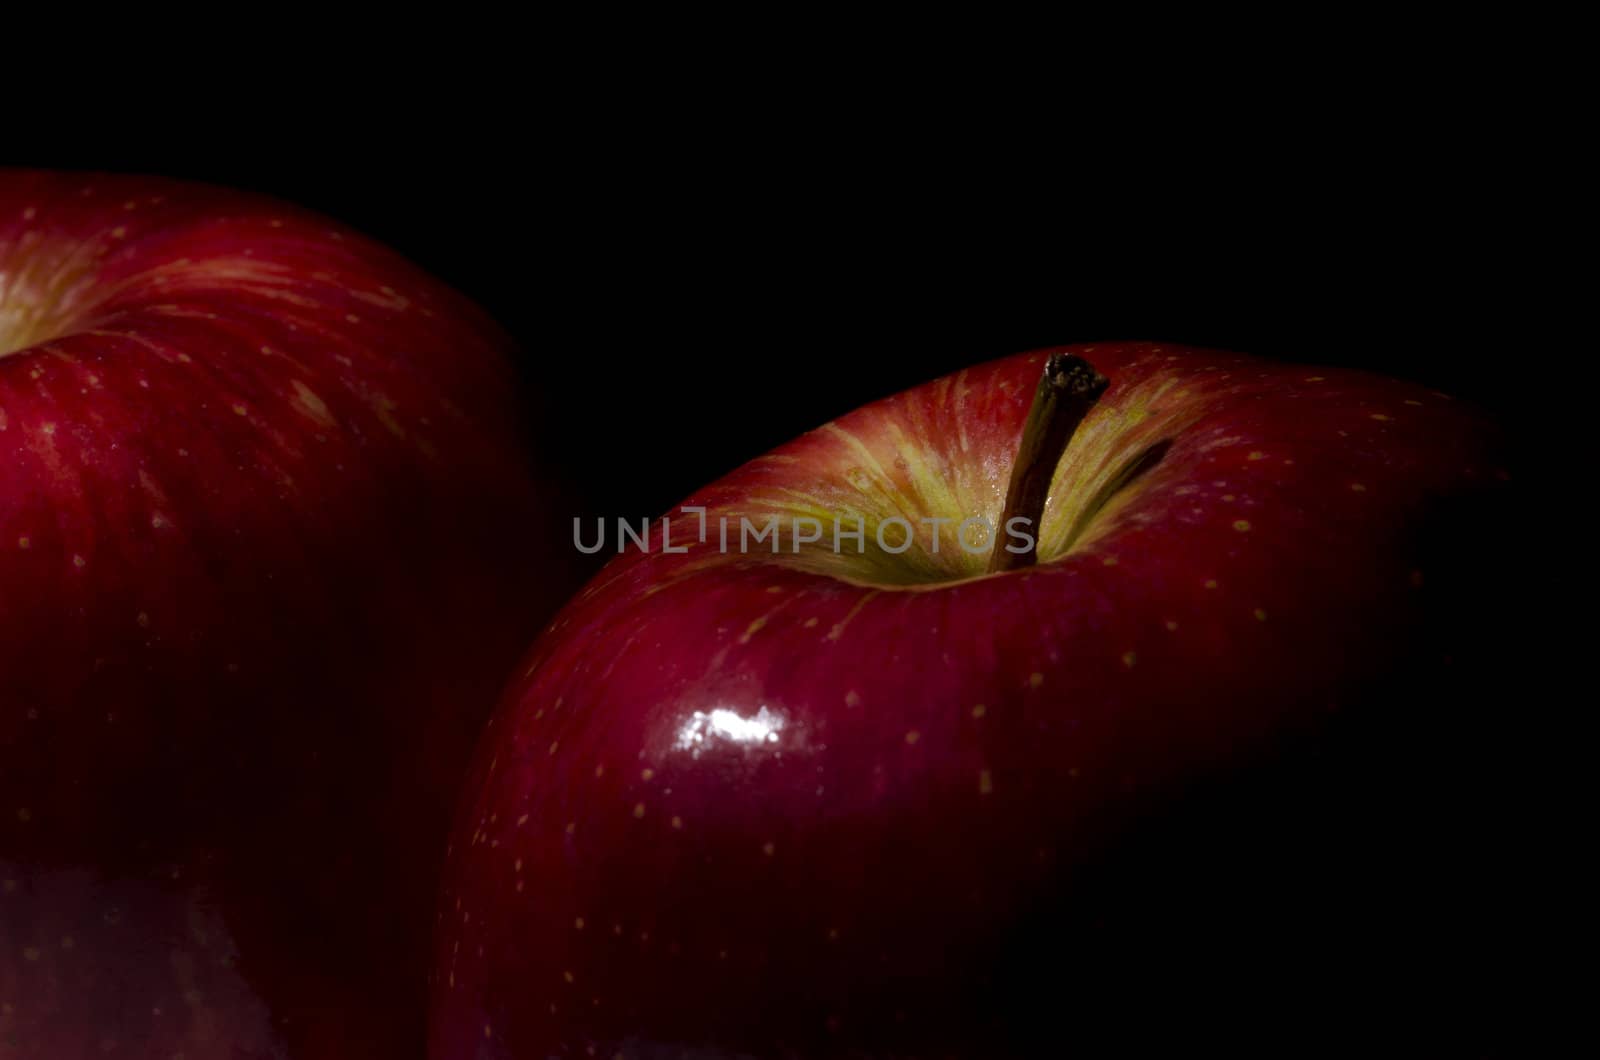 close-up of two apples on black background